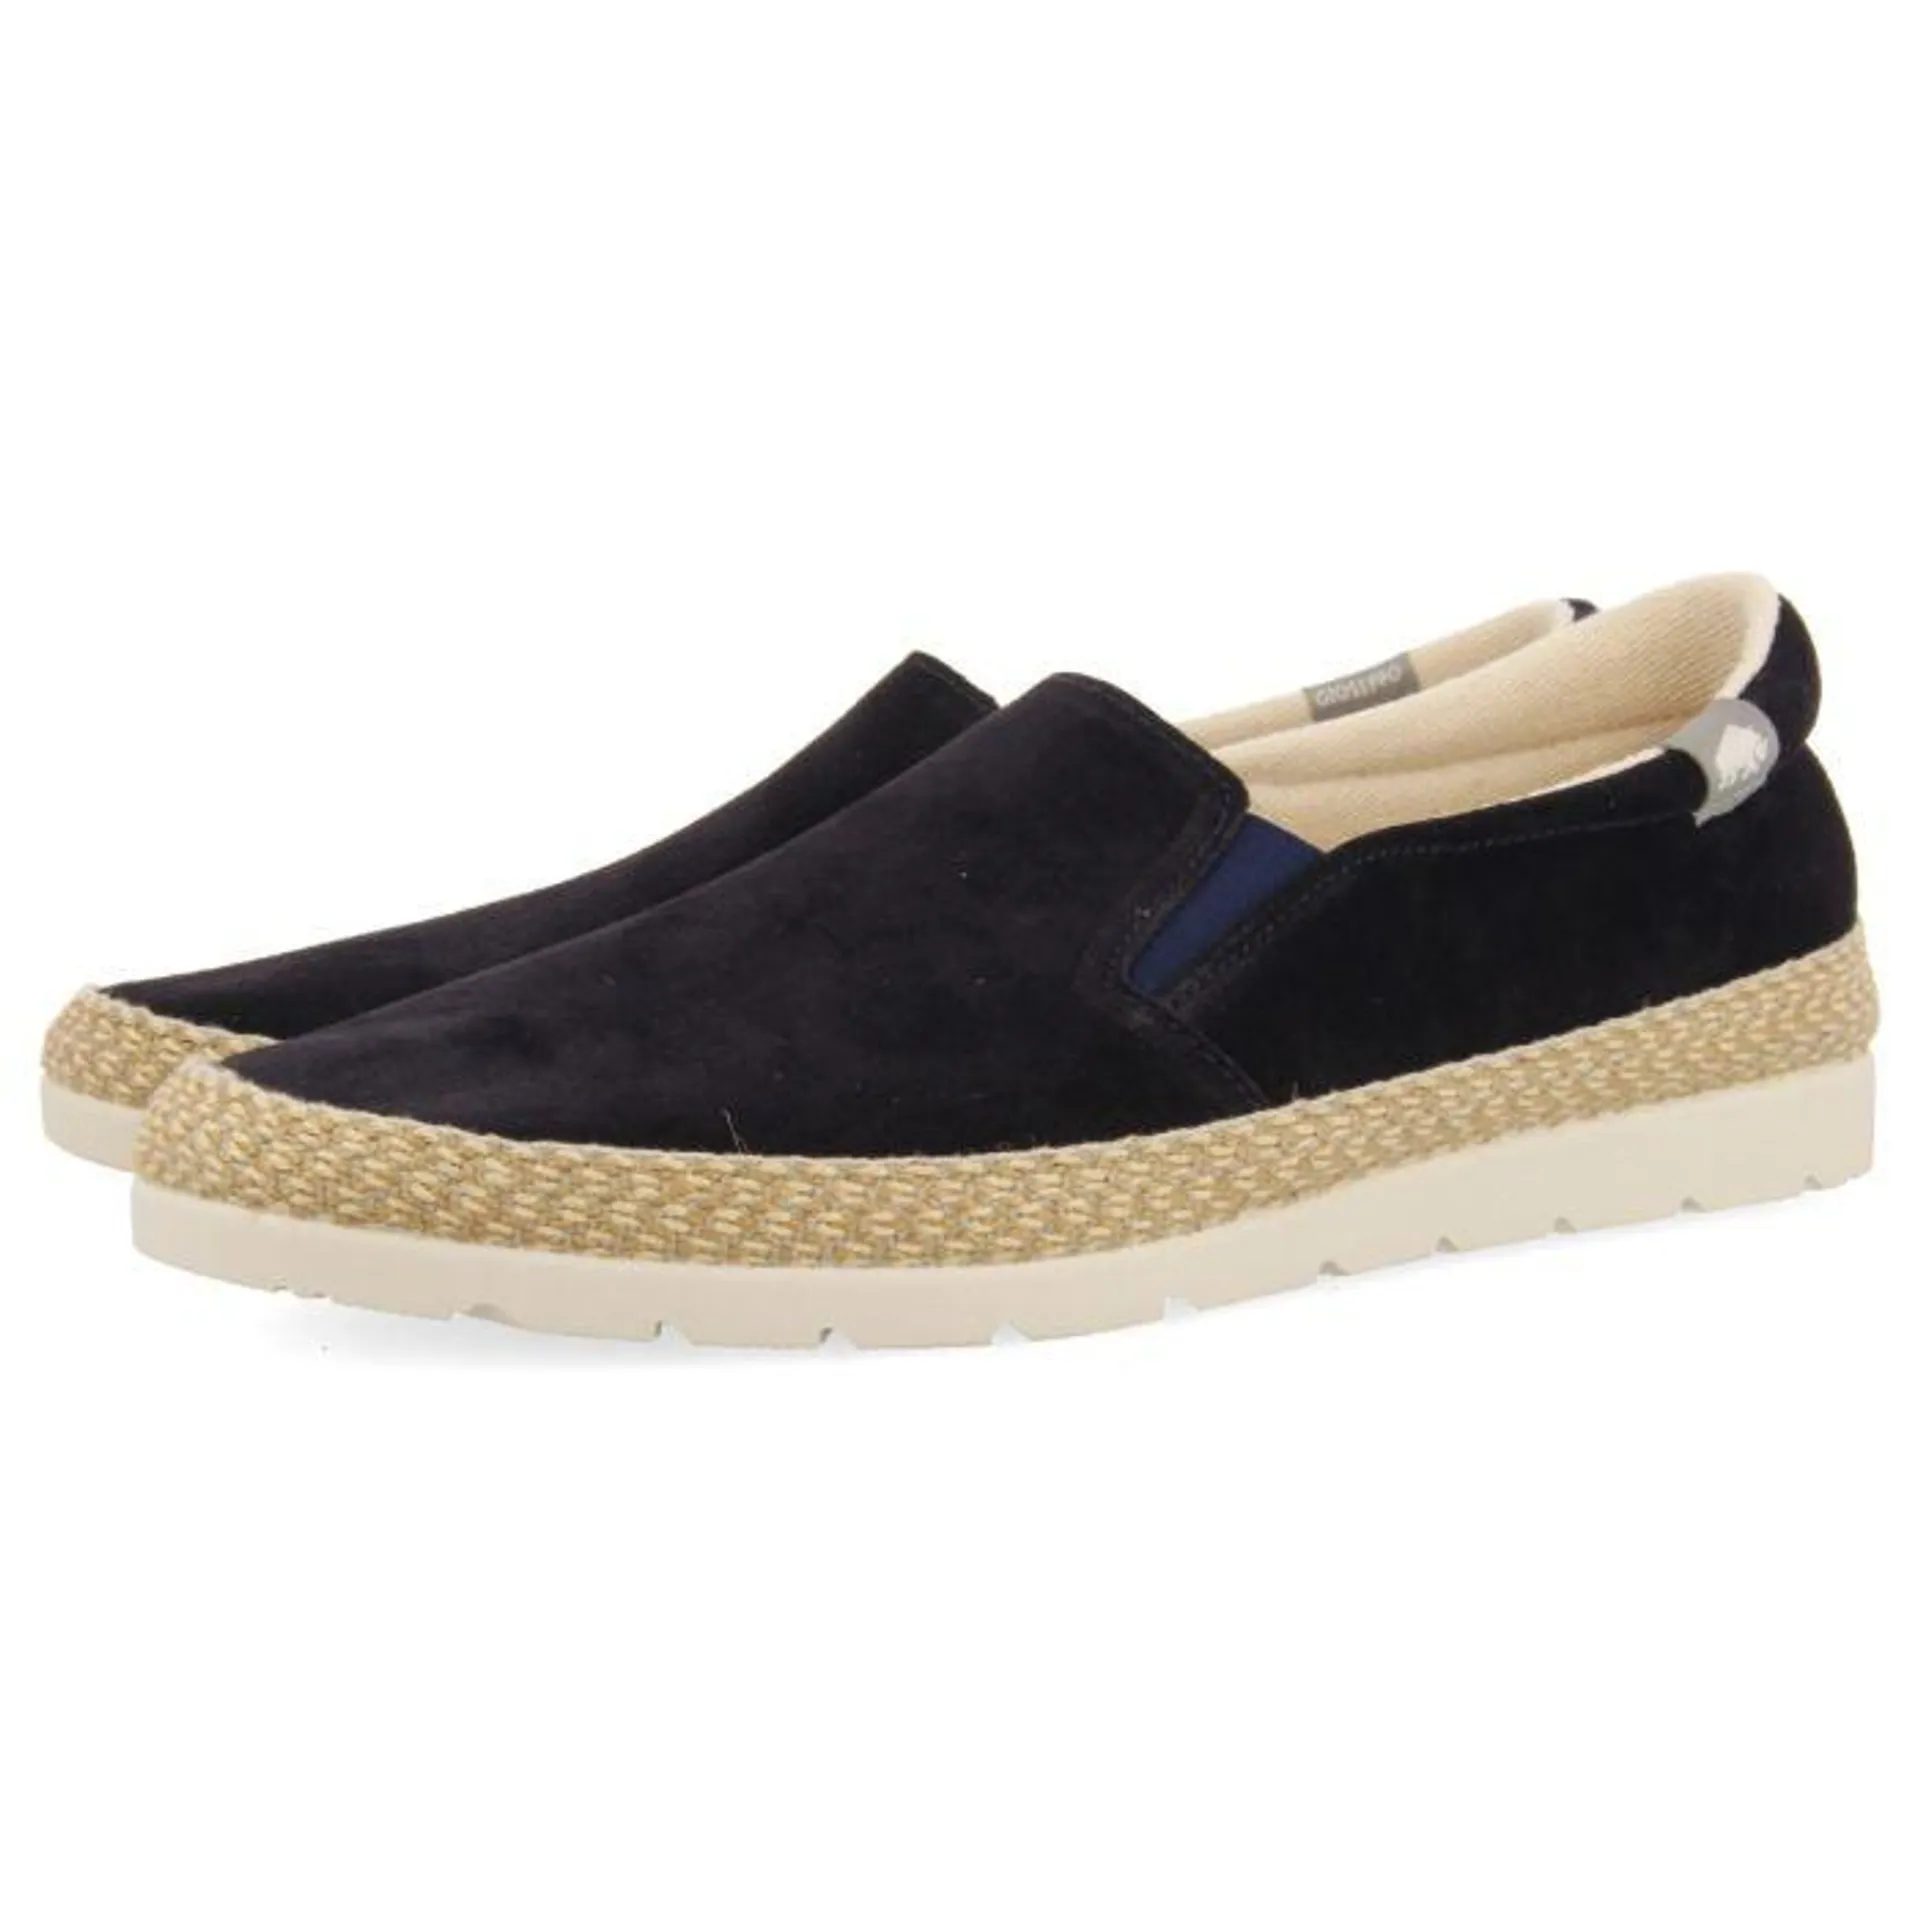 BLUE NAVY LEATHER ESPADRILLES WITH ELASTICS AND RECYCLED COTTON FOR MEN PROGER